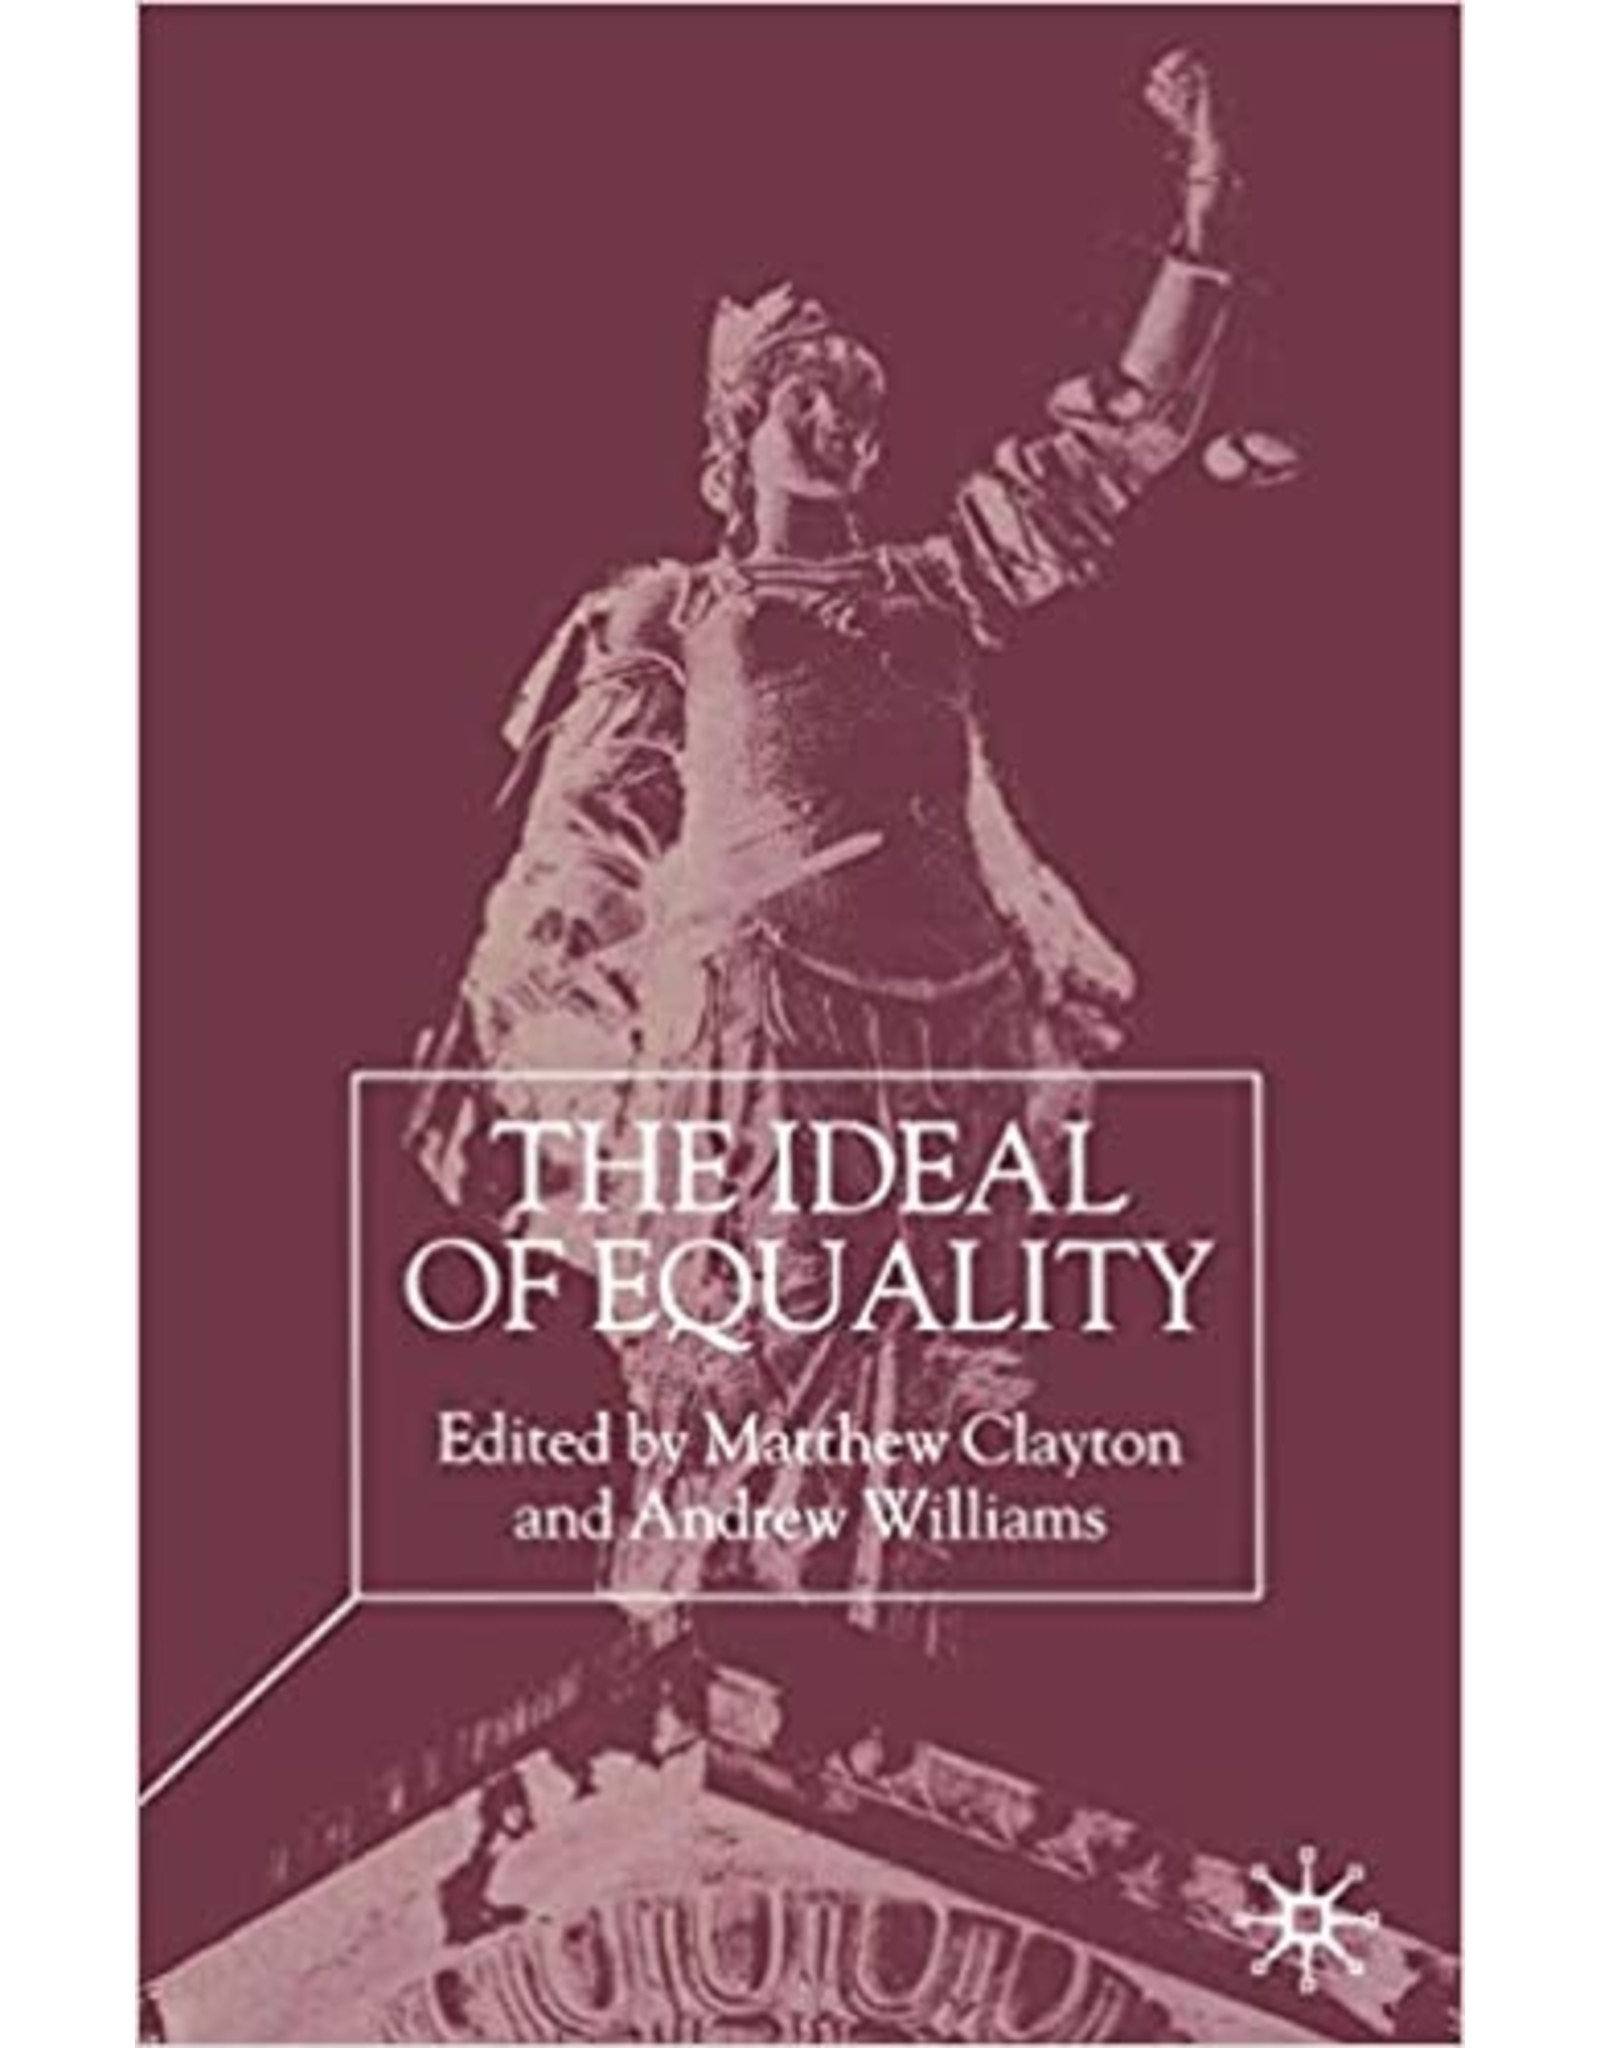 Literature The Ideal of Equality